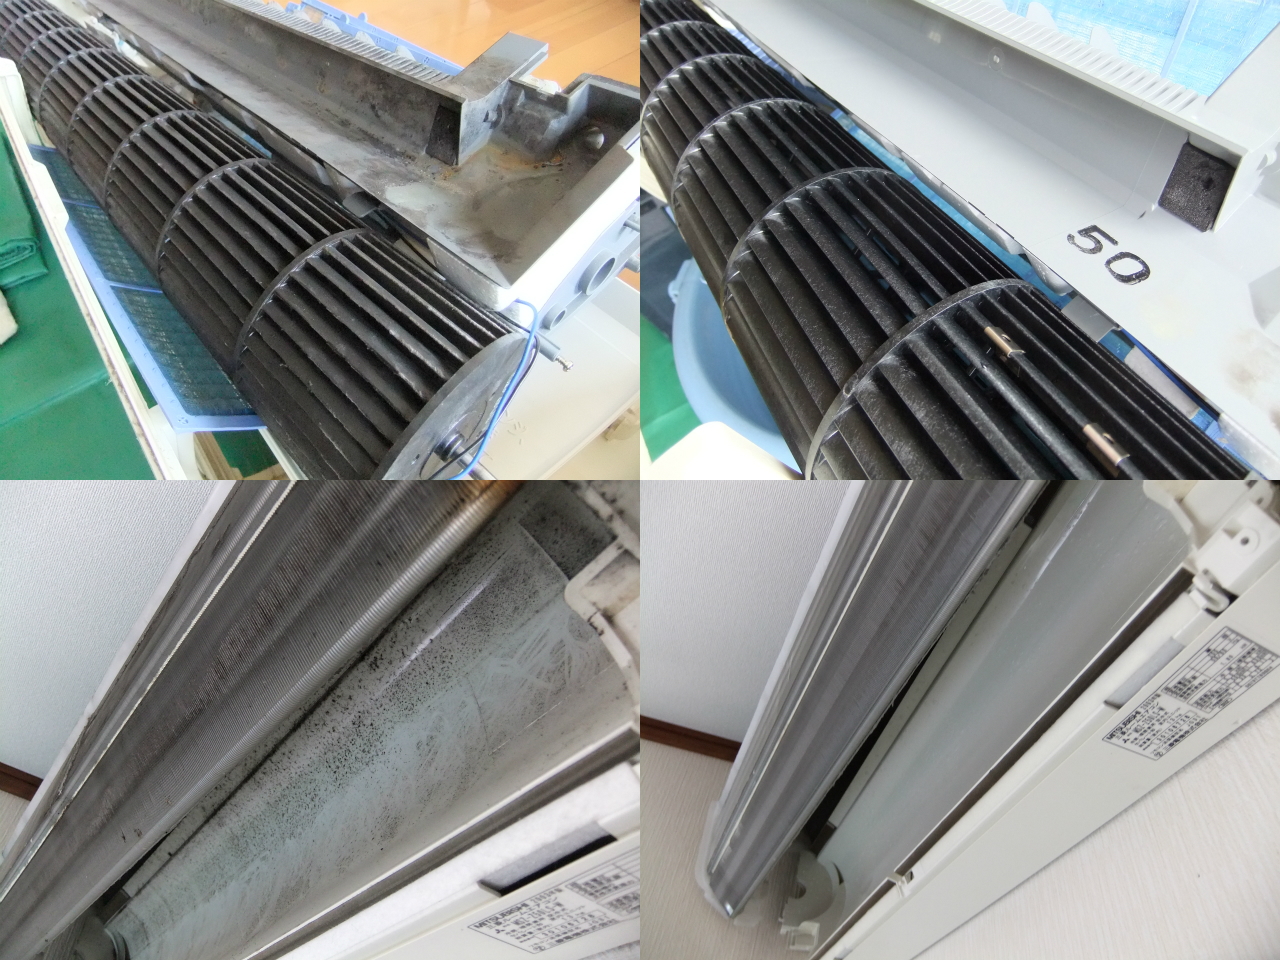 http://ajras.net/images/120410-aircon1.jpg